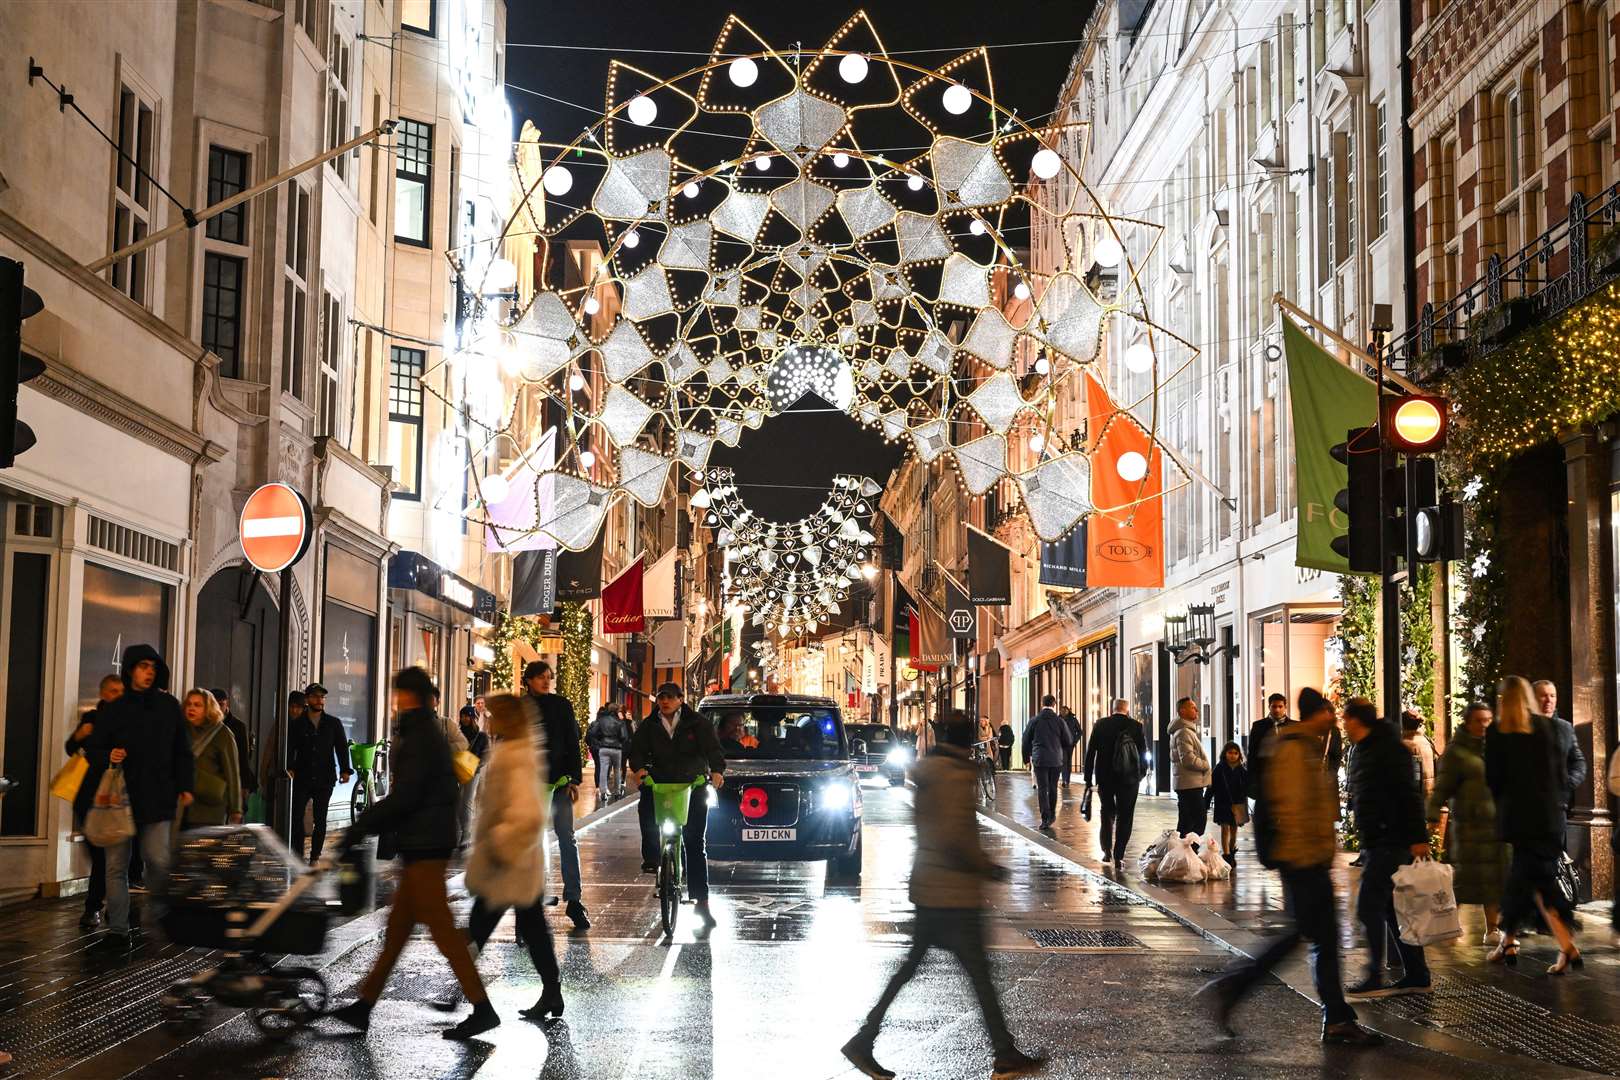 Shoppers have been taking in the festive spirit as they pick up gifts on Bond Street, London (Matt Crossick/PA)